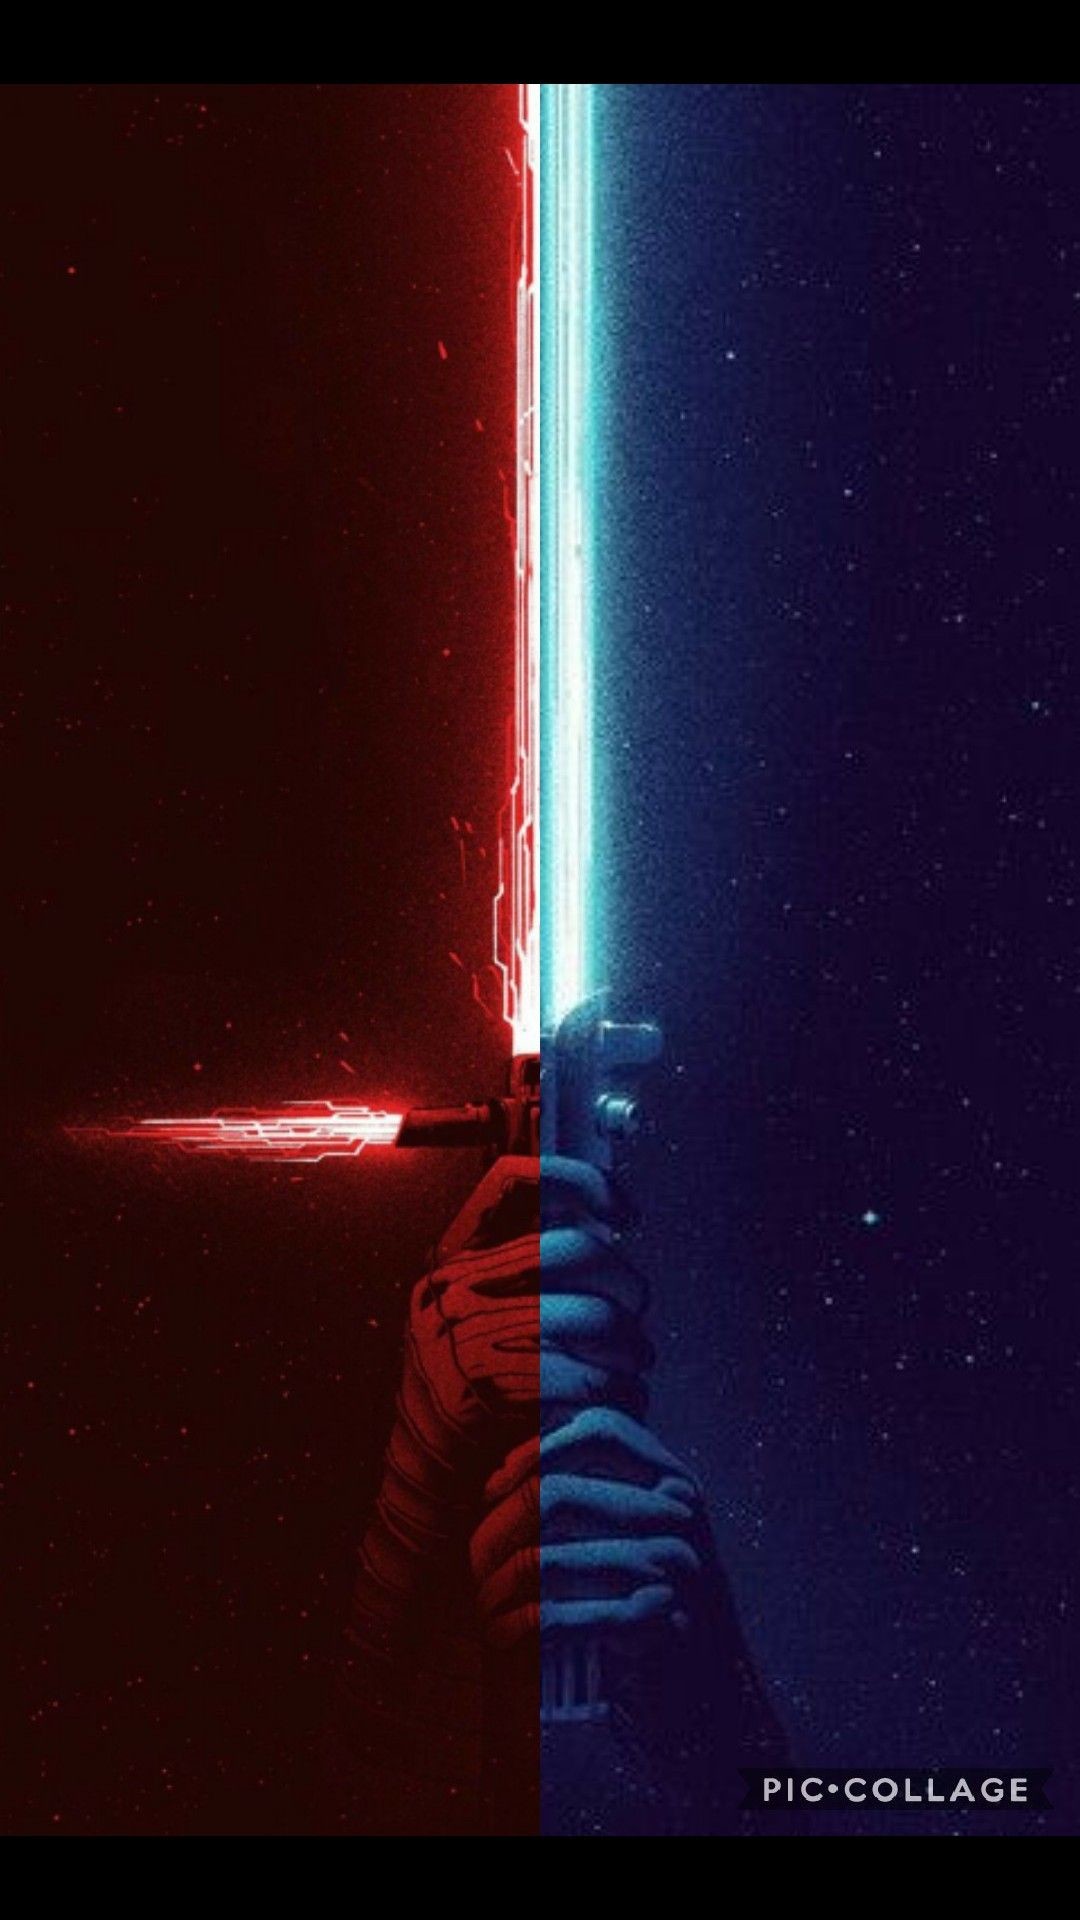 1080x1920 High Quality image of Finn with Lightsaber : StarWars. Lightsabers wallpaper  Minimalistic ...